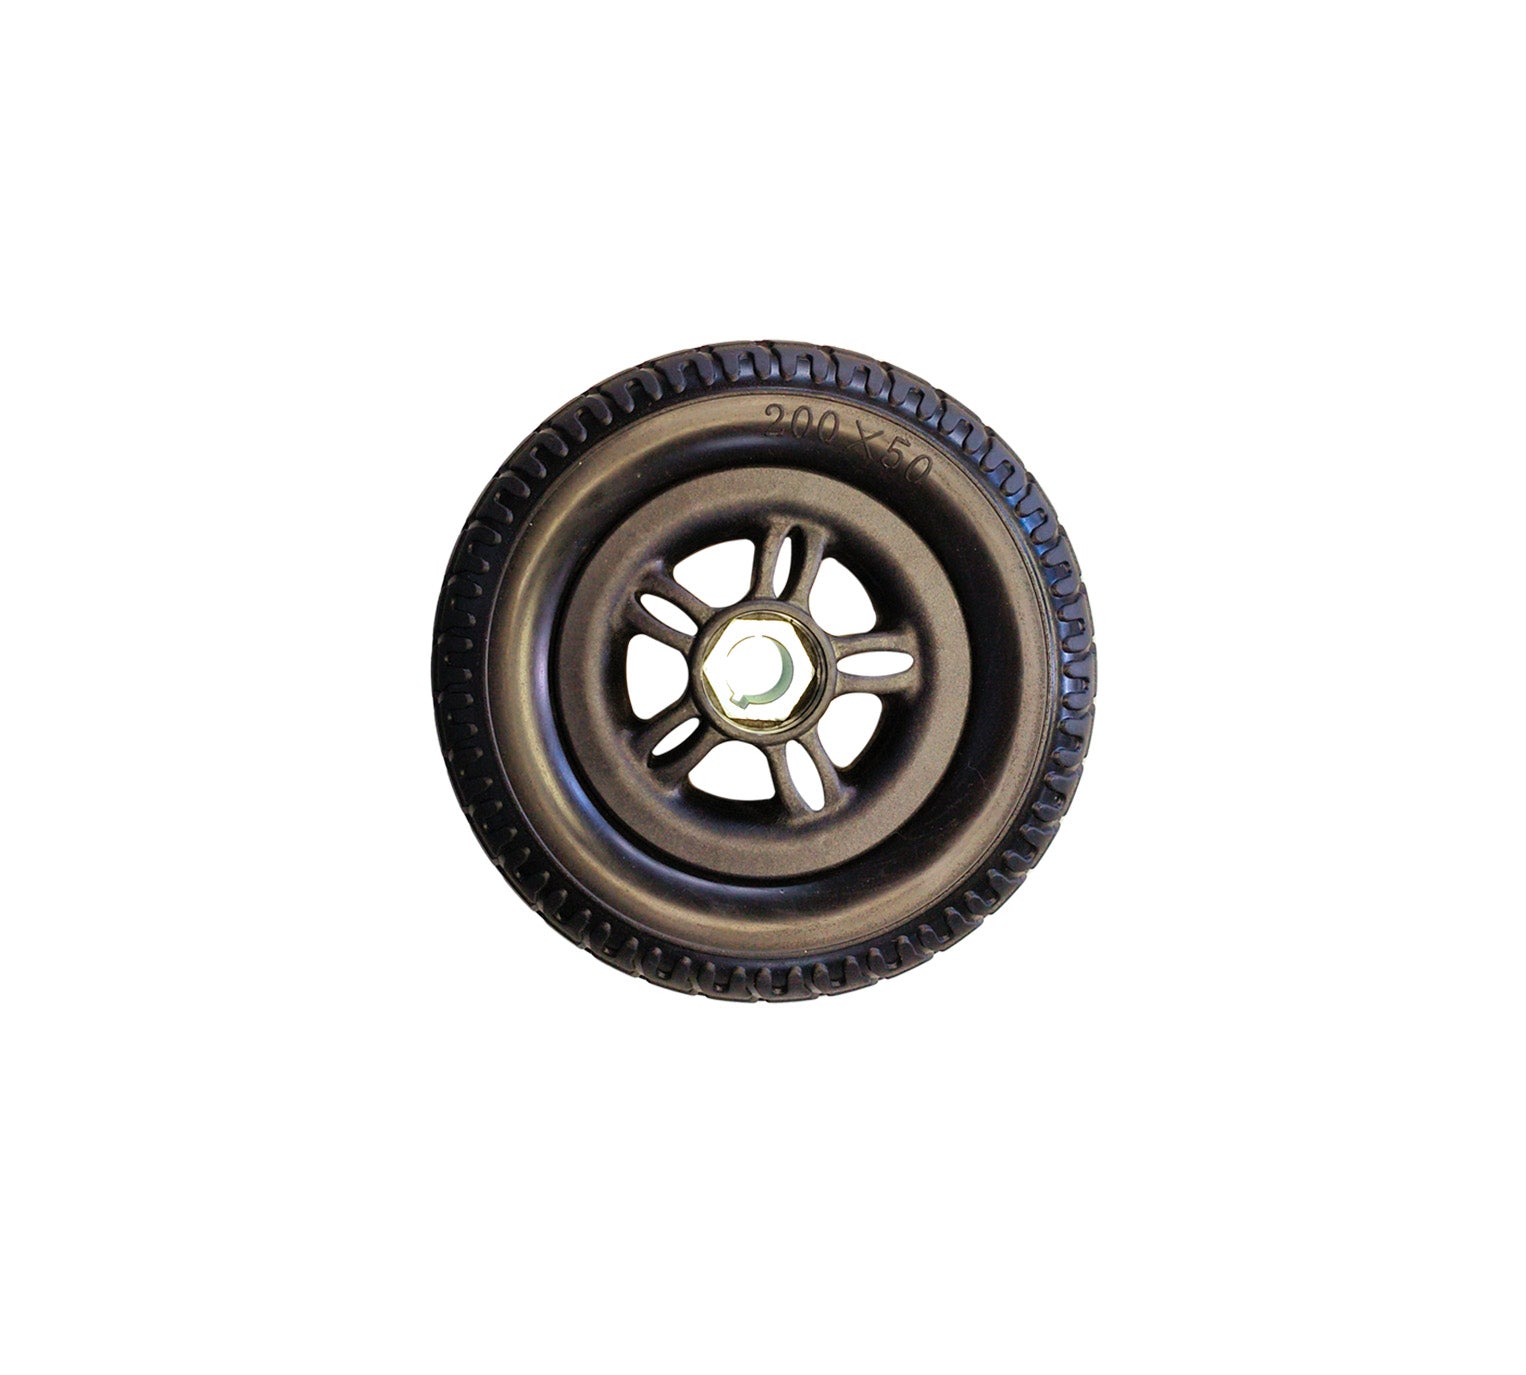 200x50 Rear Tyre with Black Rim and Cap